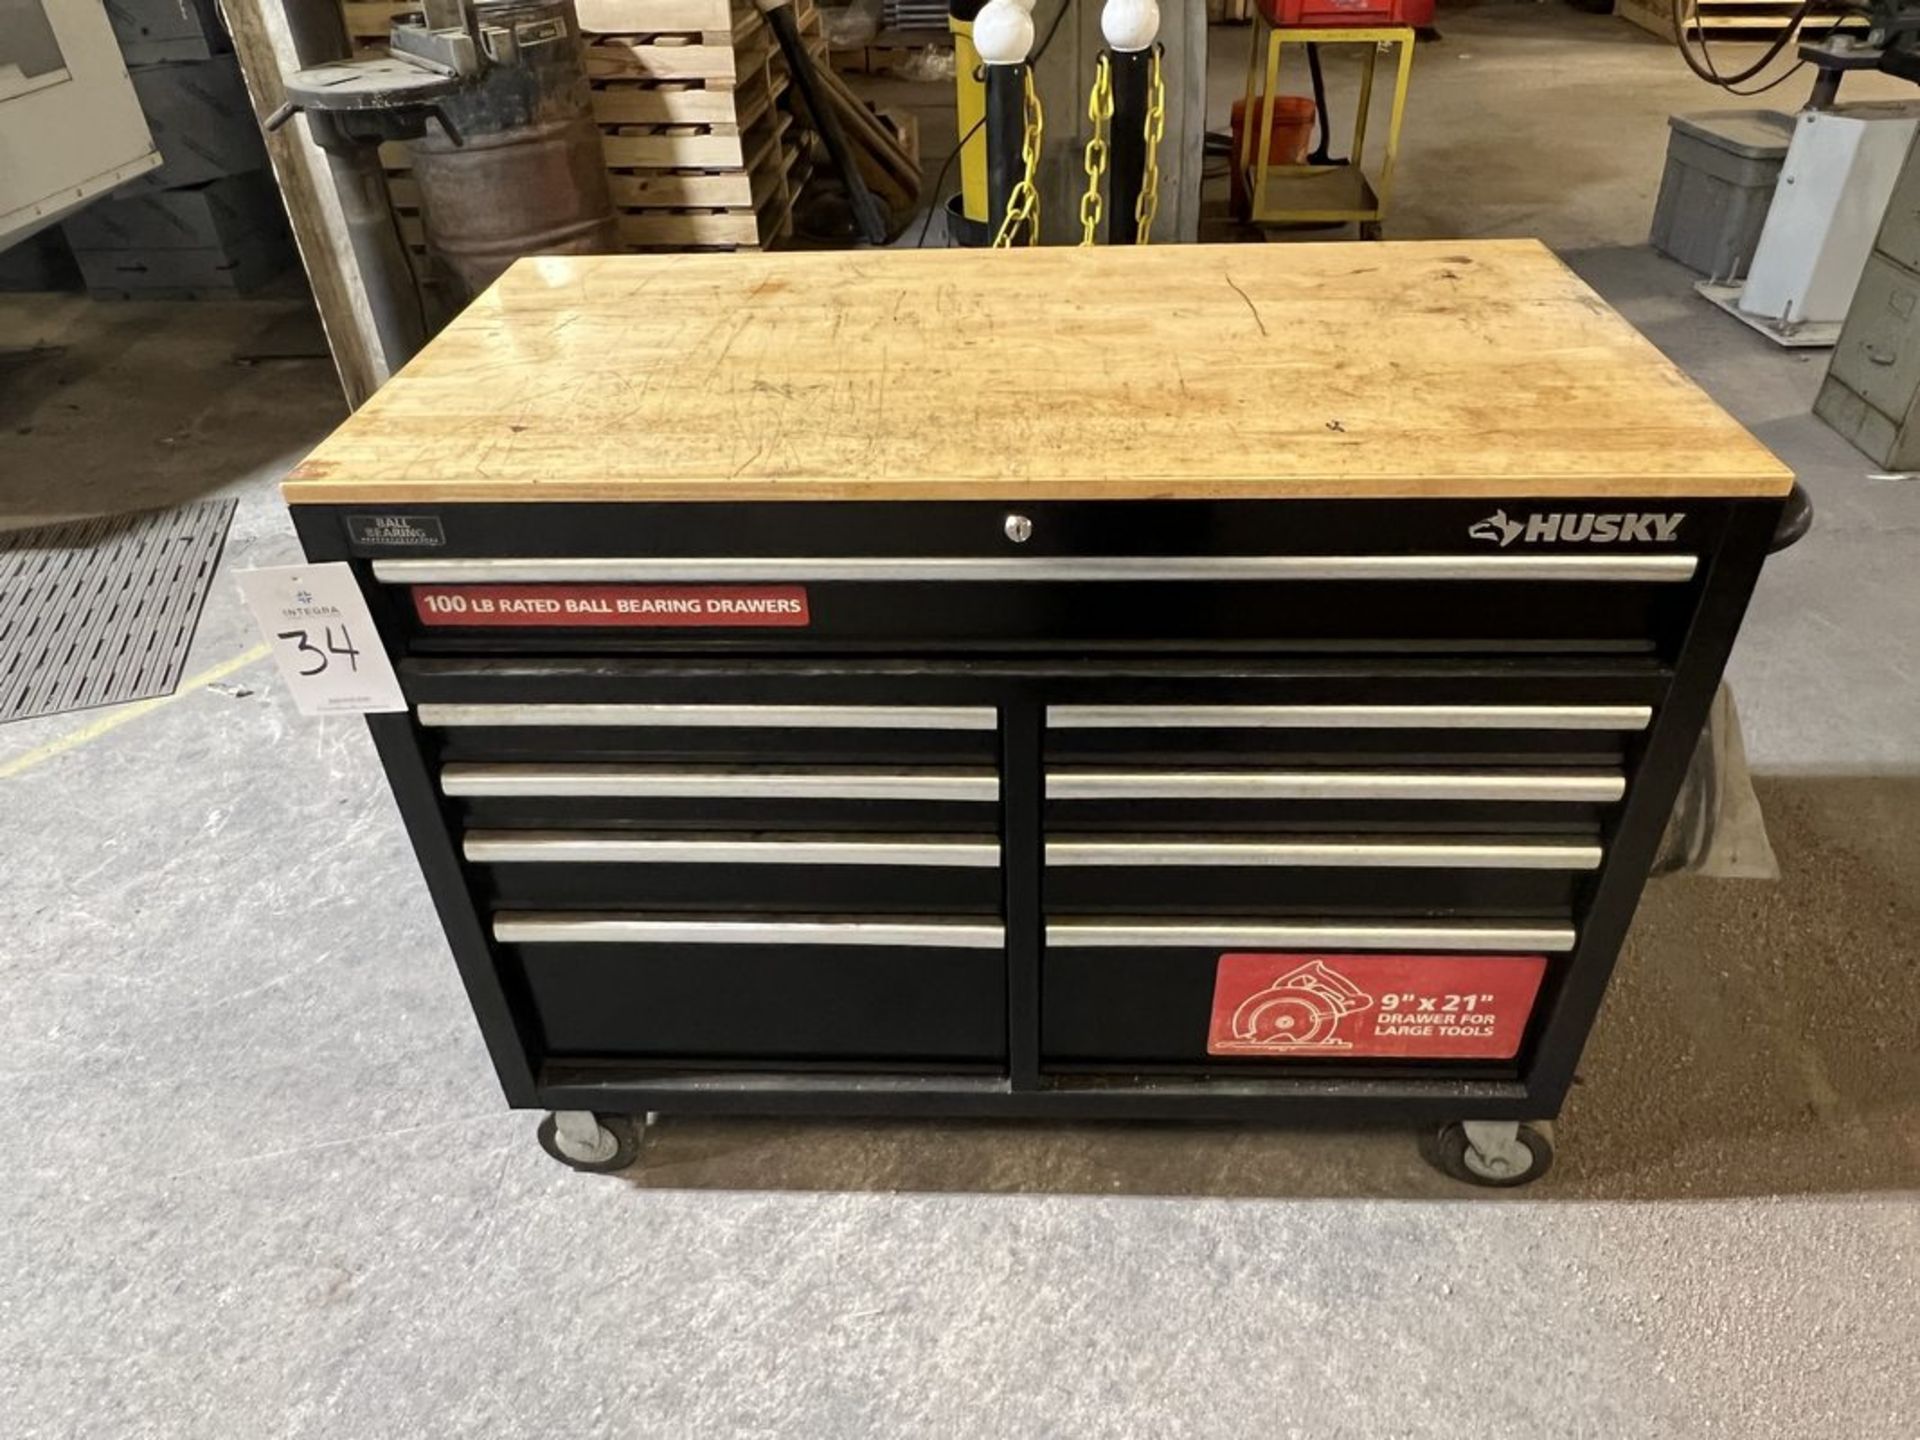 Husky 9-Drawer Rolling Tool Cabinet with Contents